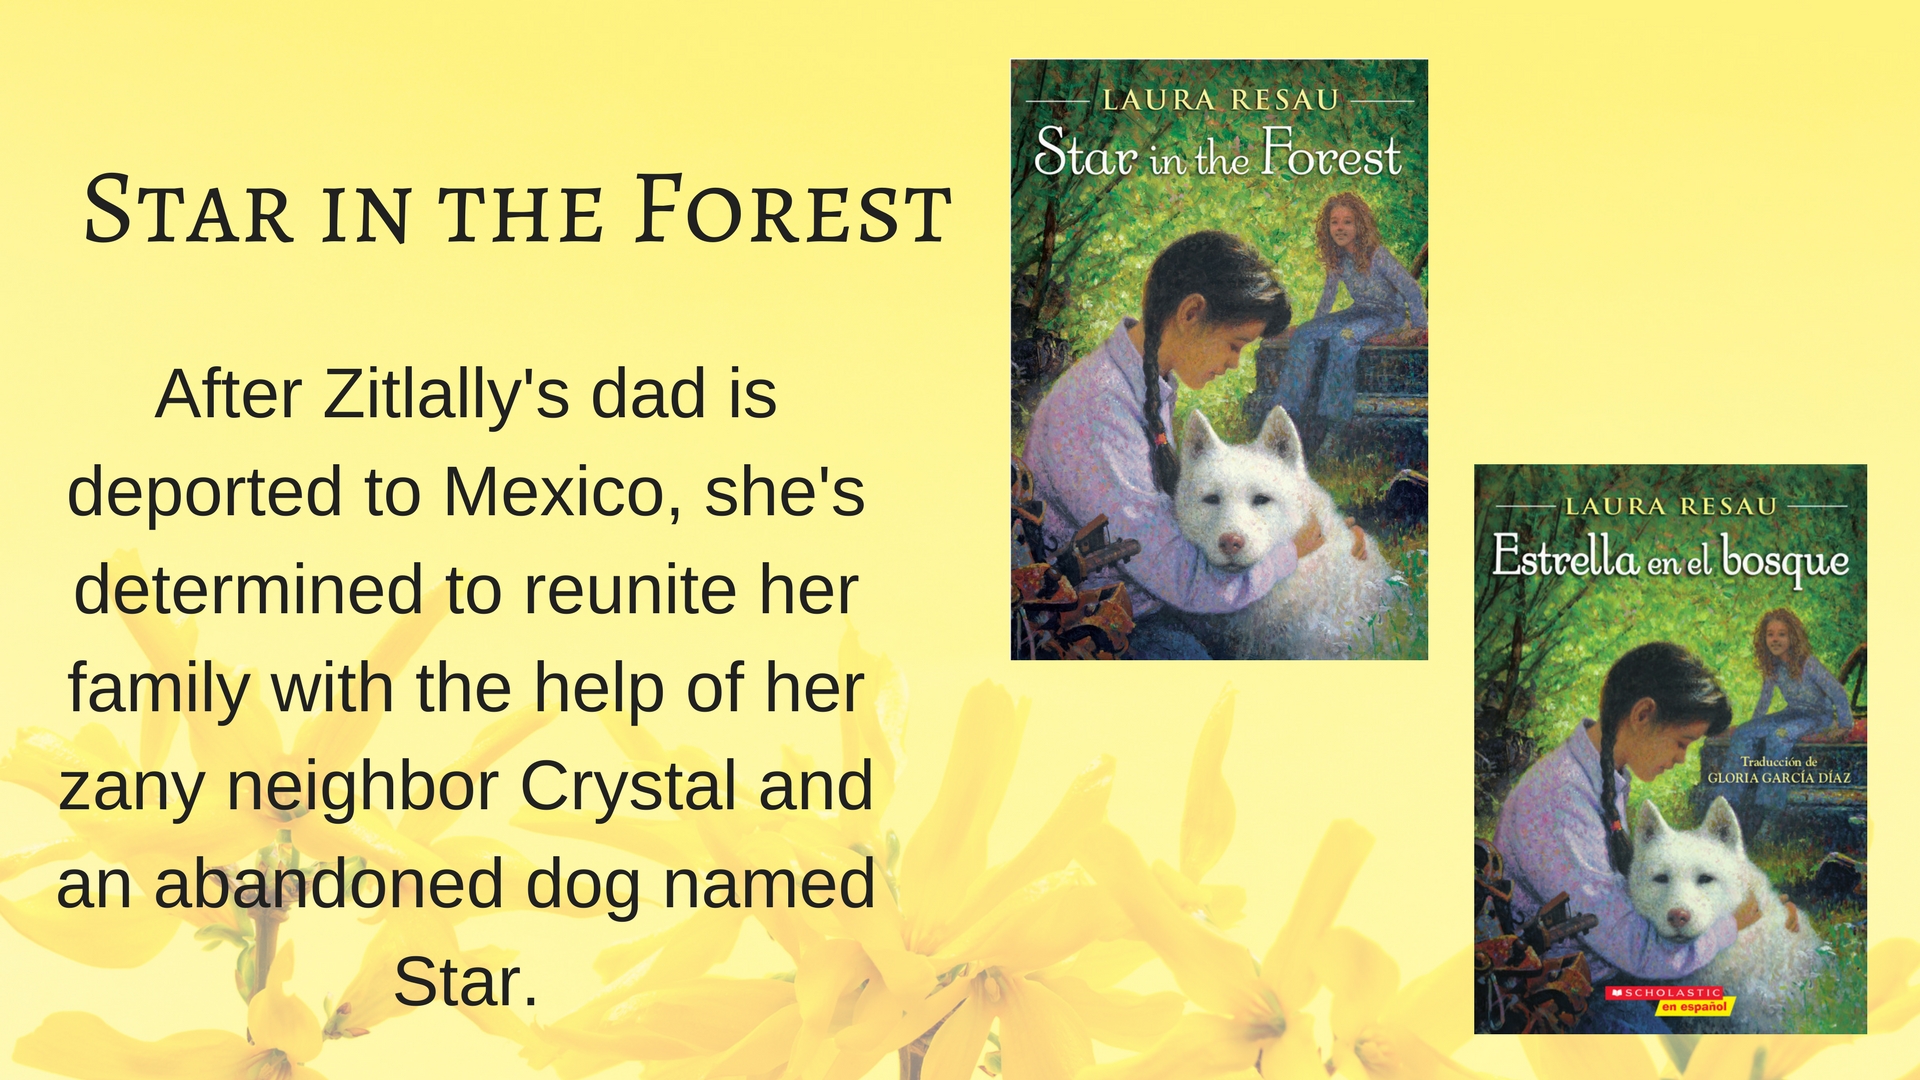 Star in the Forest canva summary 2.jpg